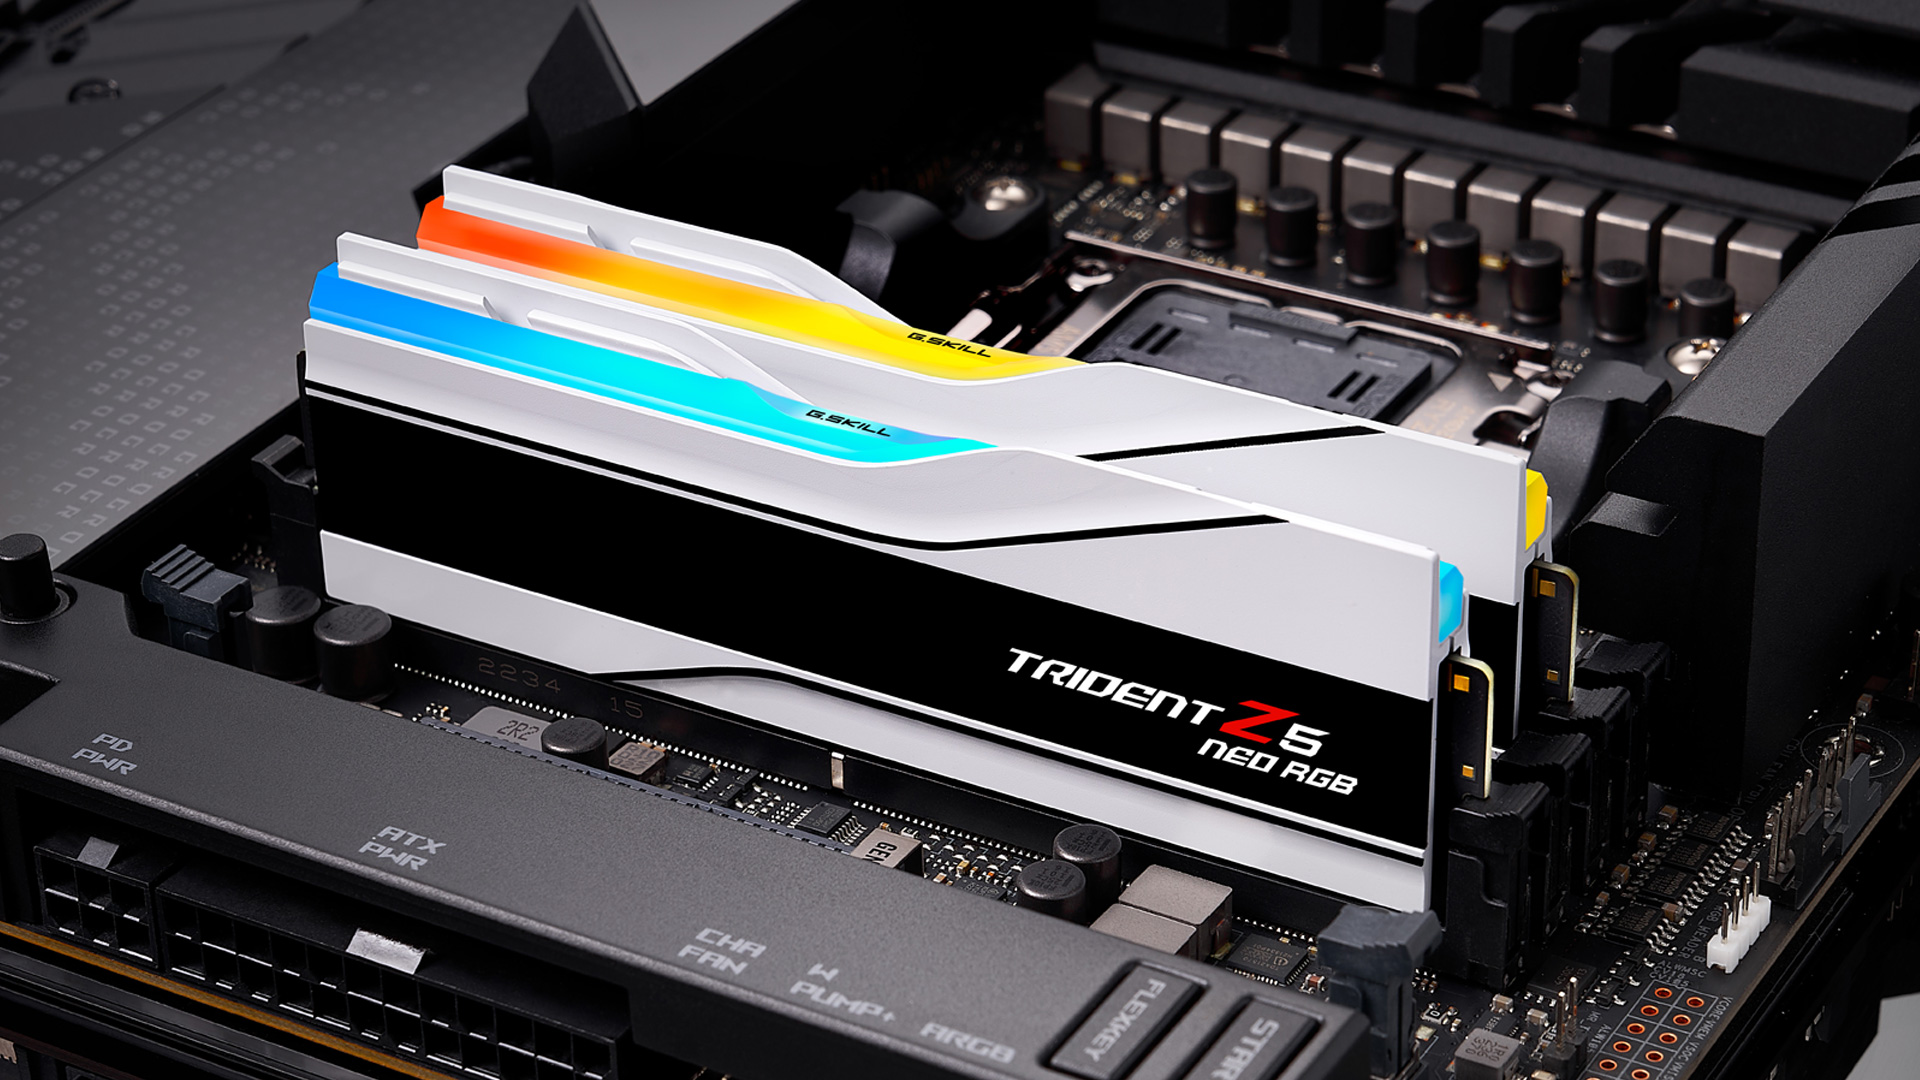 G.SKILL: Announced new DDR5-6400 memory kits for the AMD AM5 platform